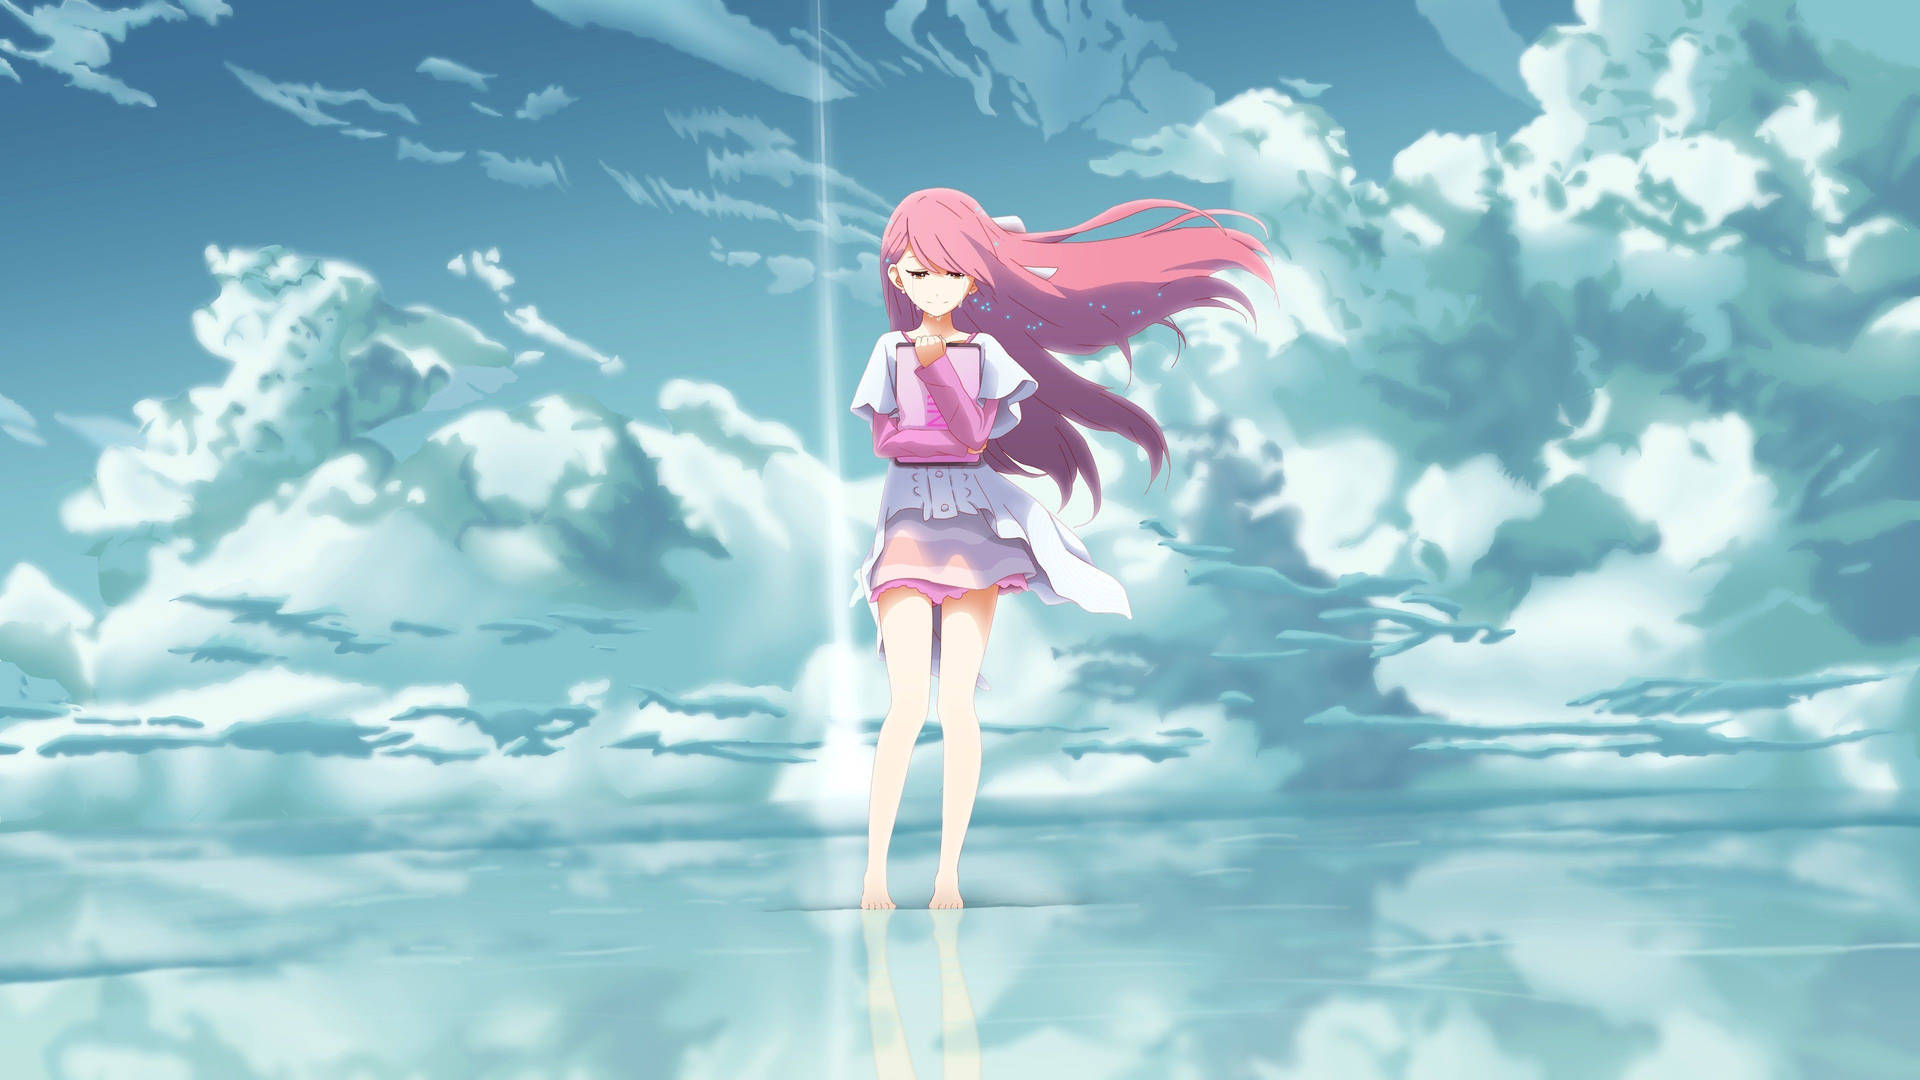 Free Anime Wallpaper Downloads, [5800+] Anime Wallpapers for FREE |  